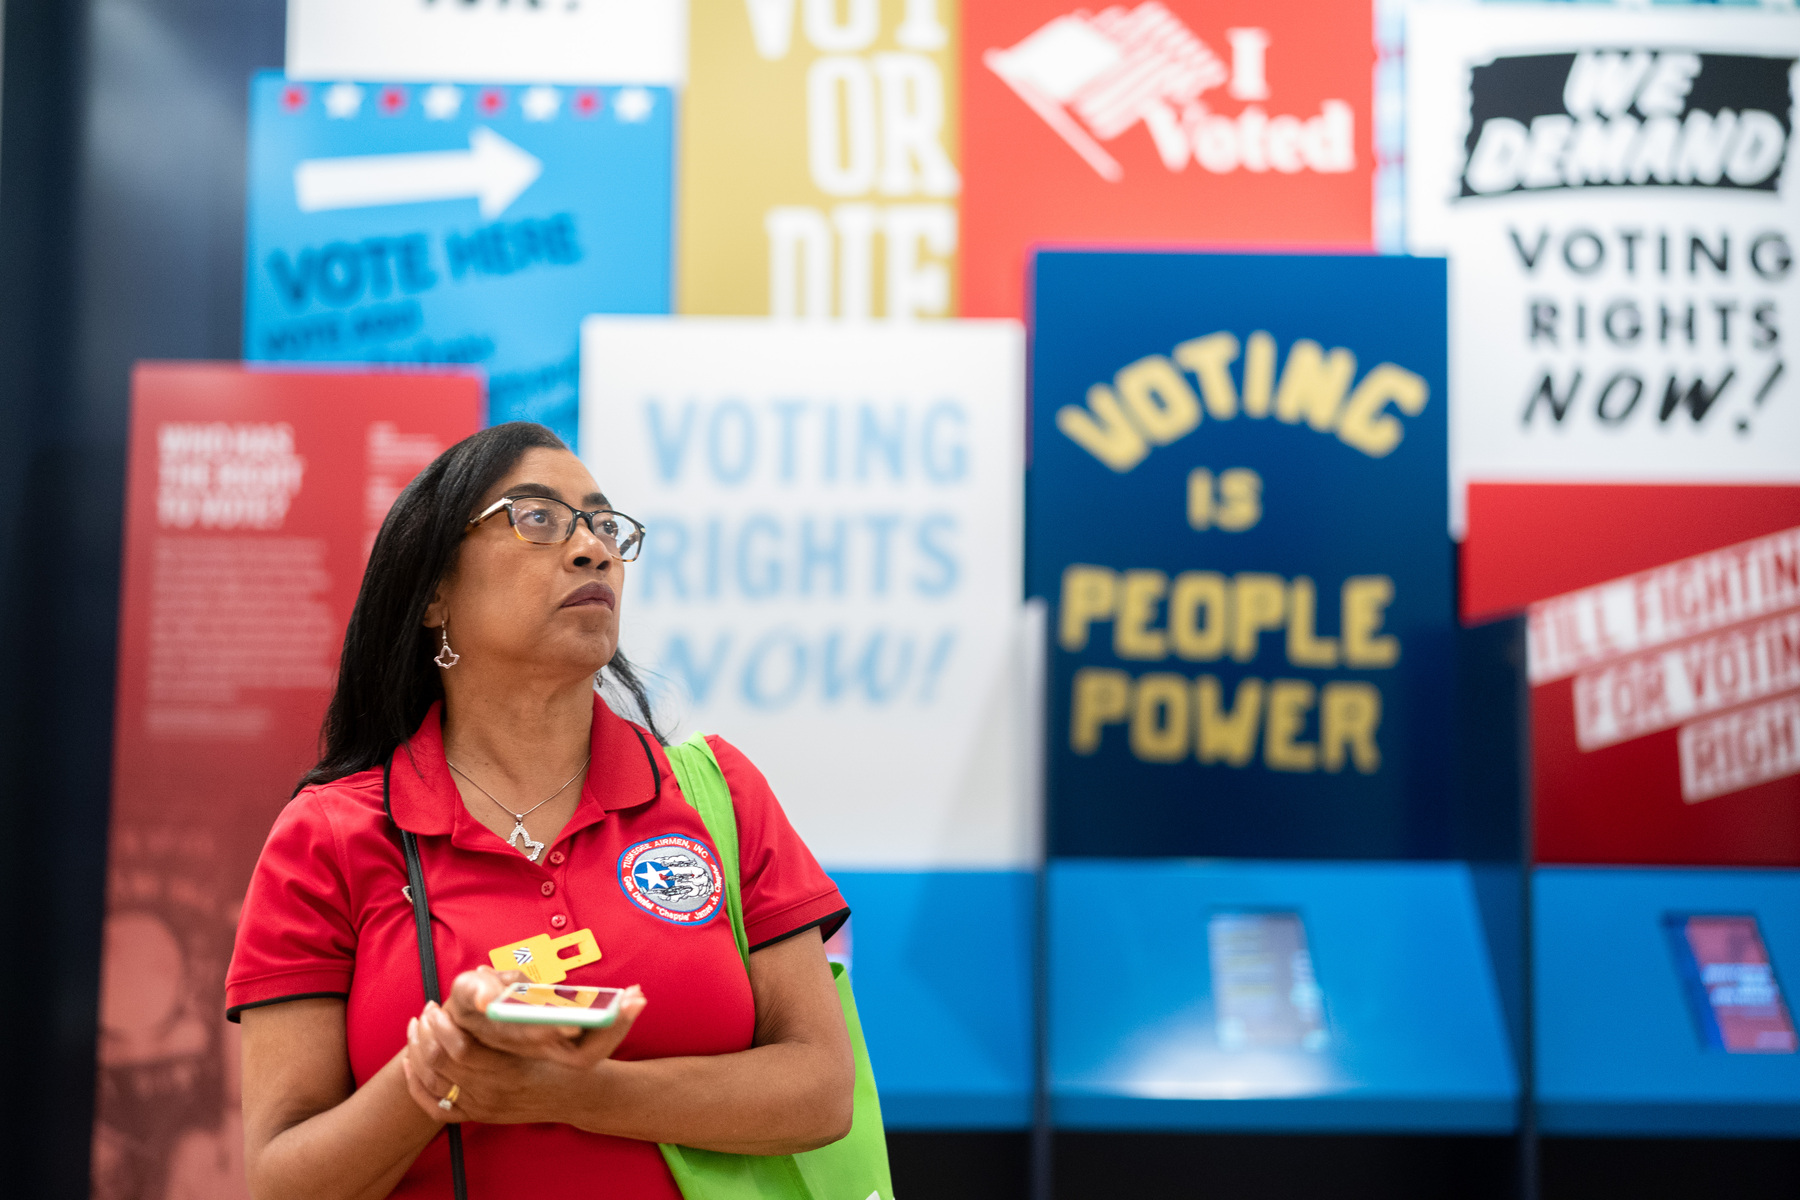 A woman walks through an exhibit on voting rights at the International African American Museum.